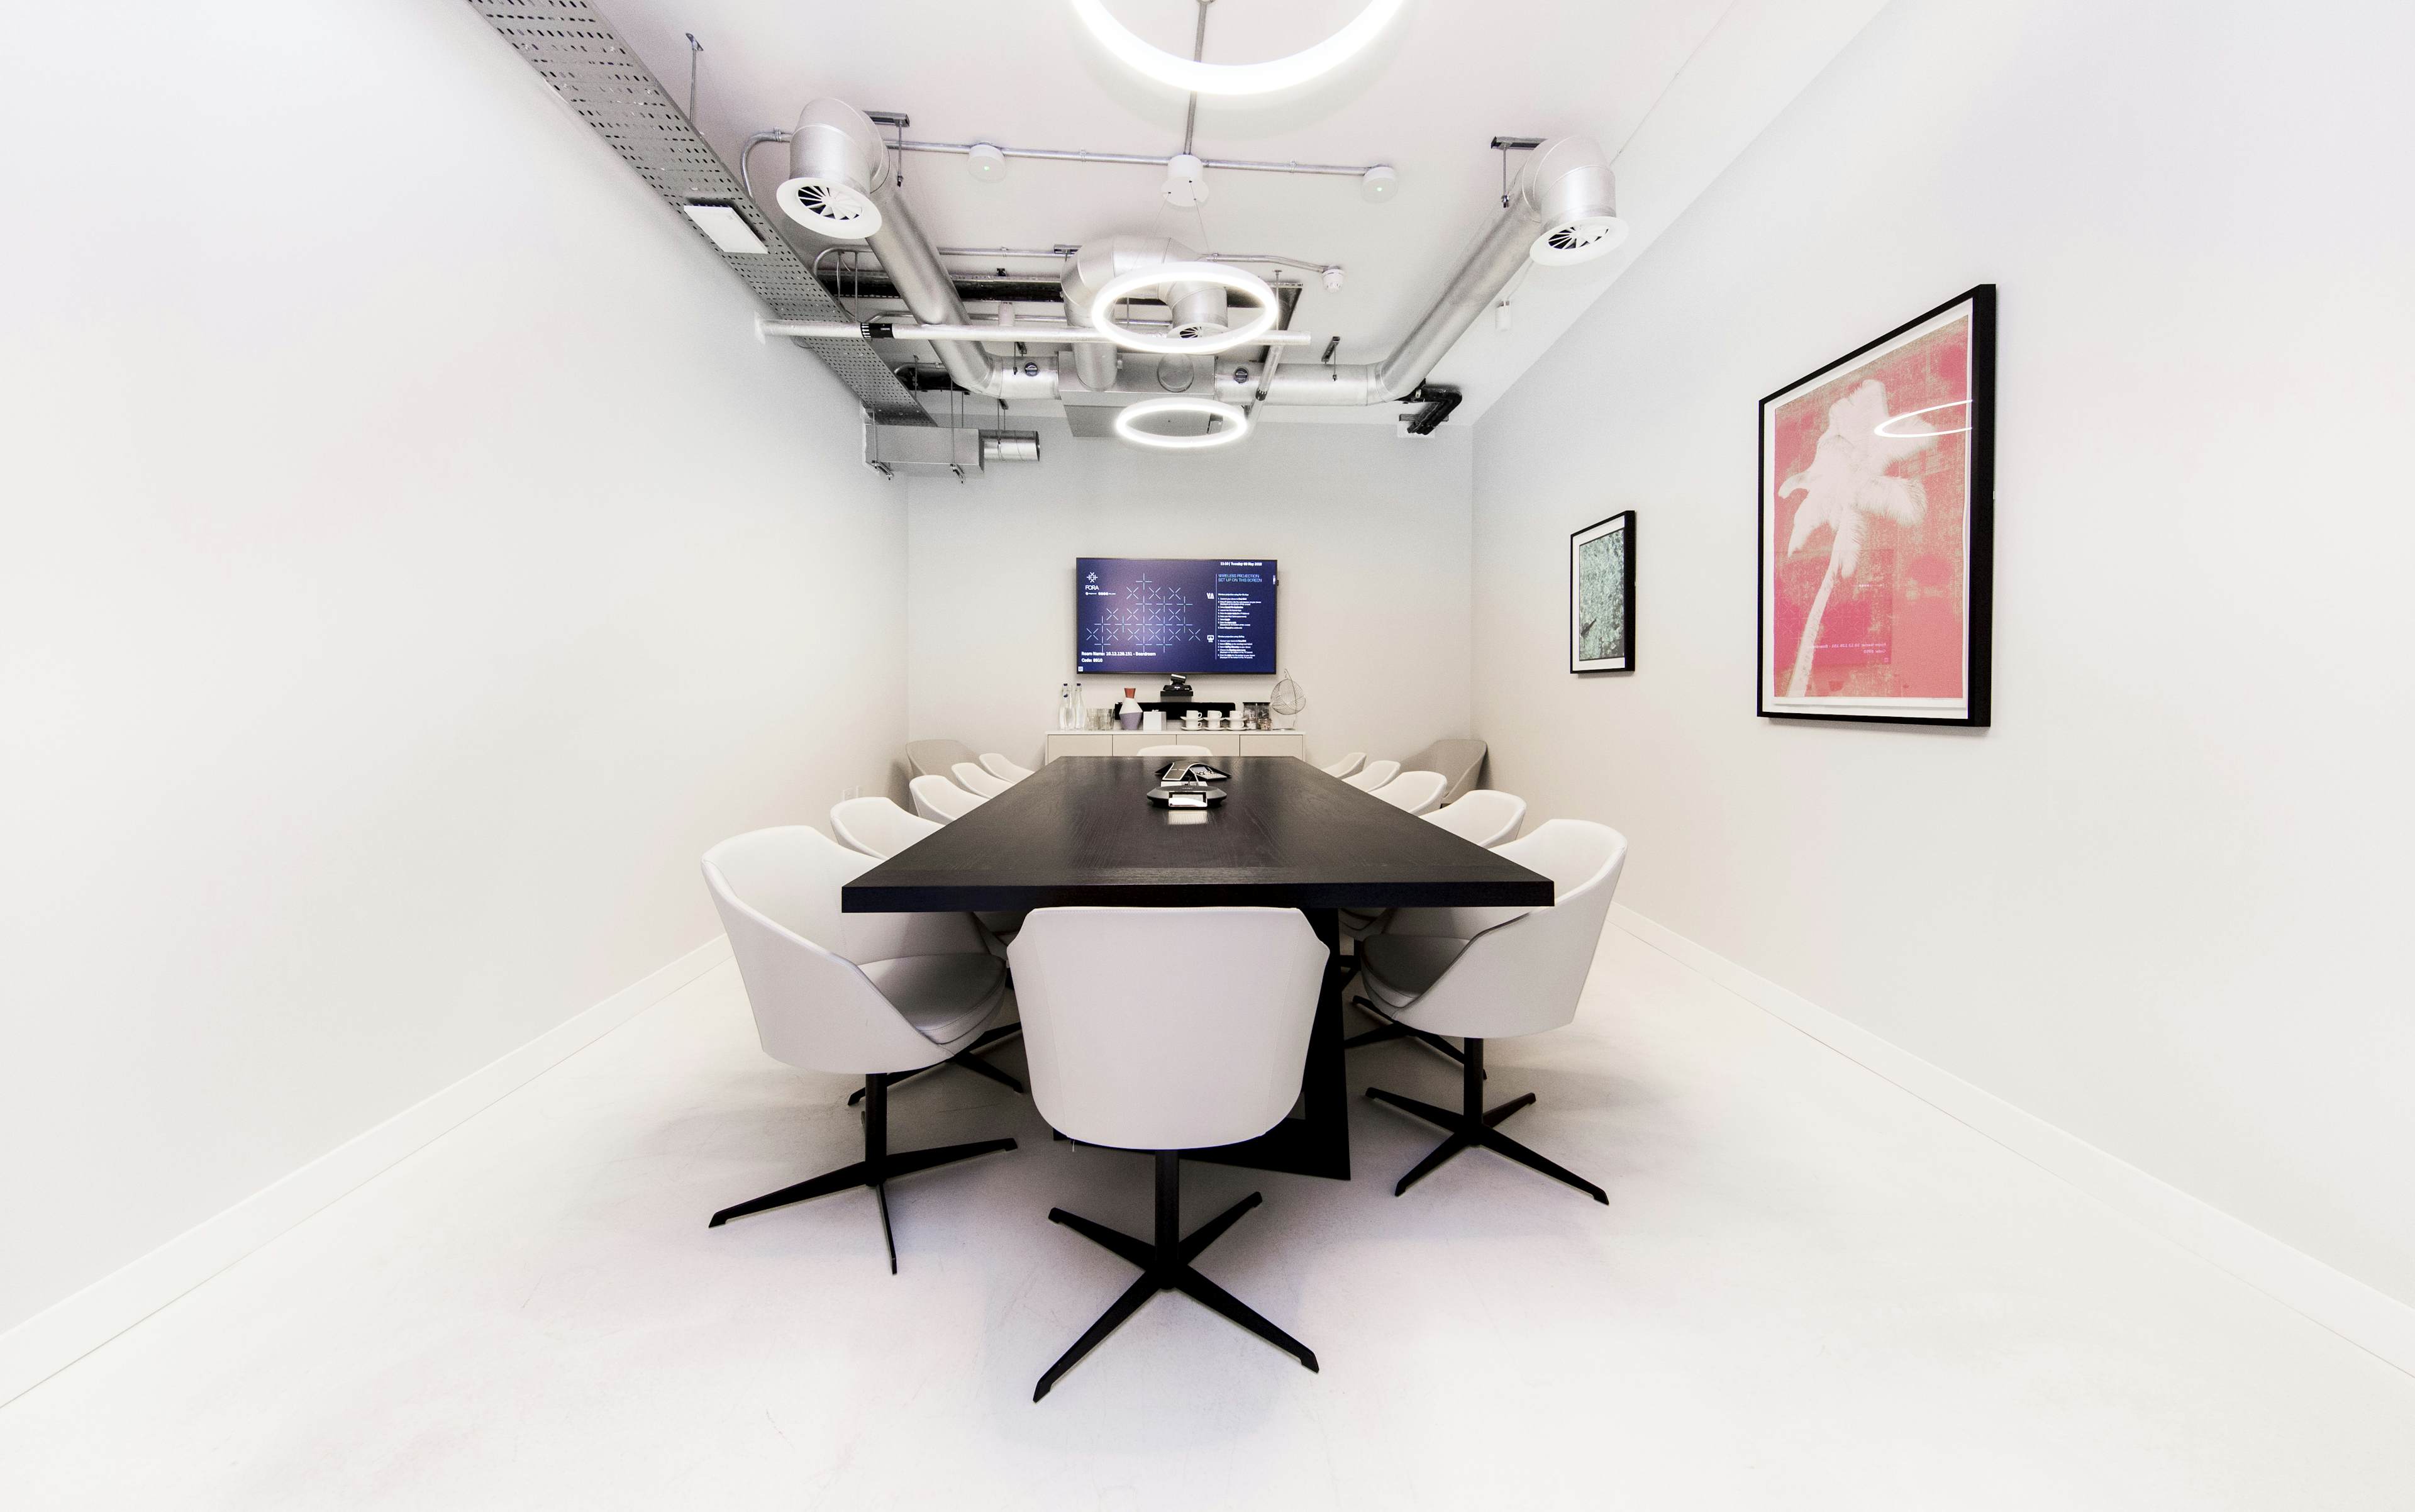 FORA- Clerkenwell, Dallington St, Gallery on 5 - The Boardroom image 1